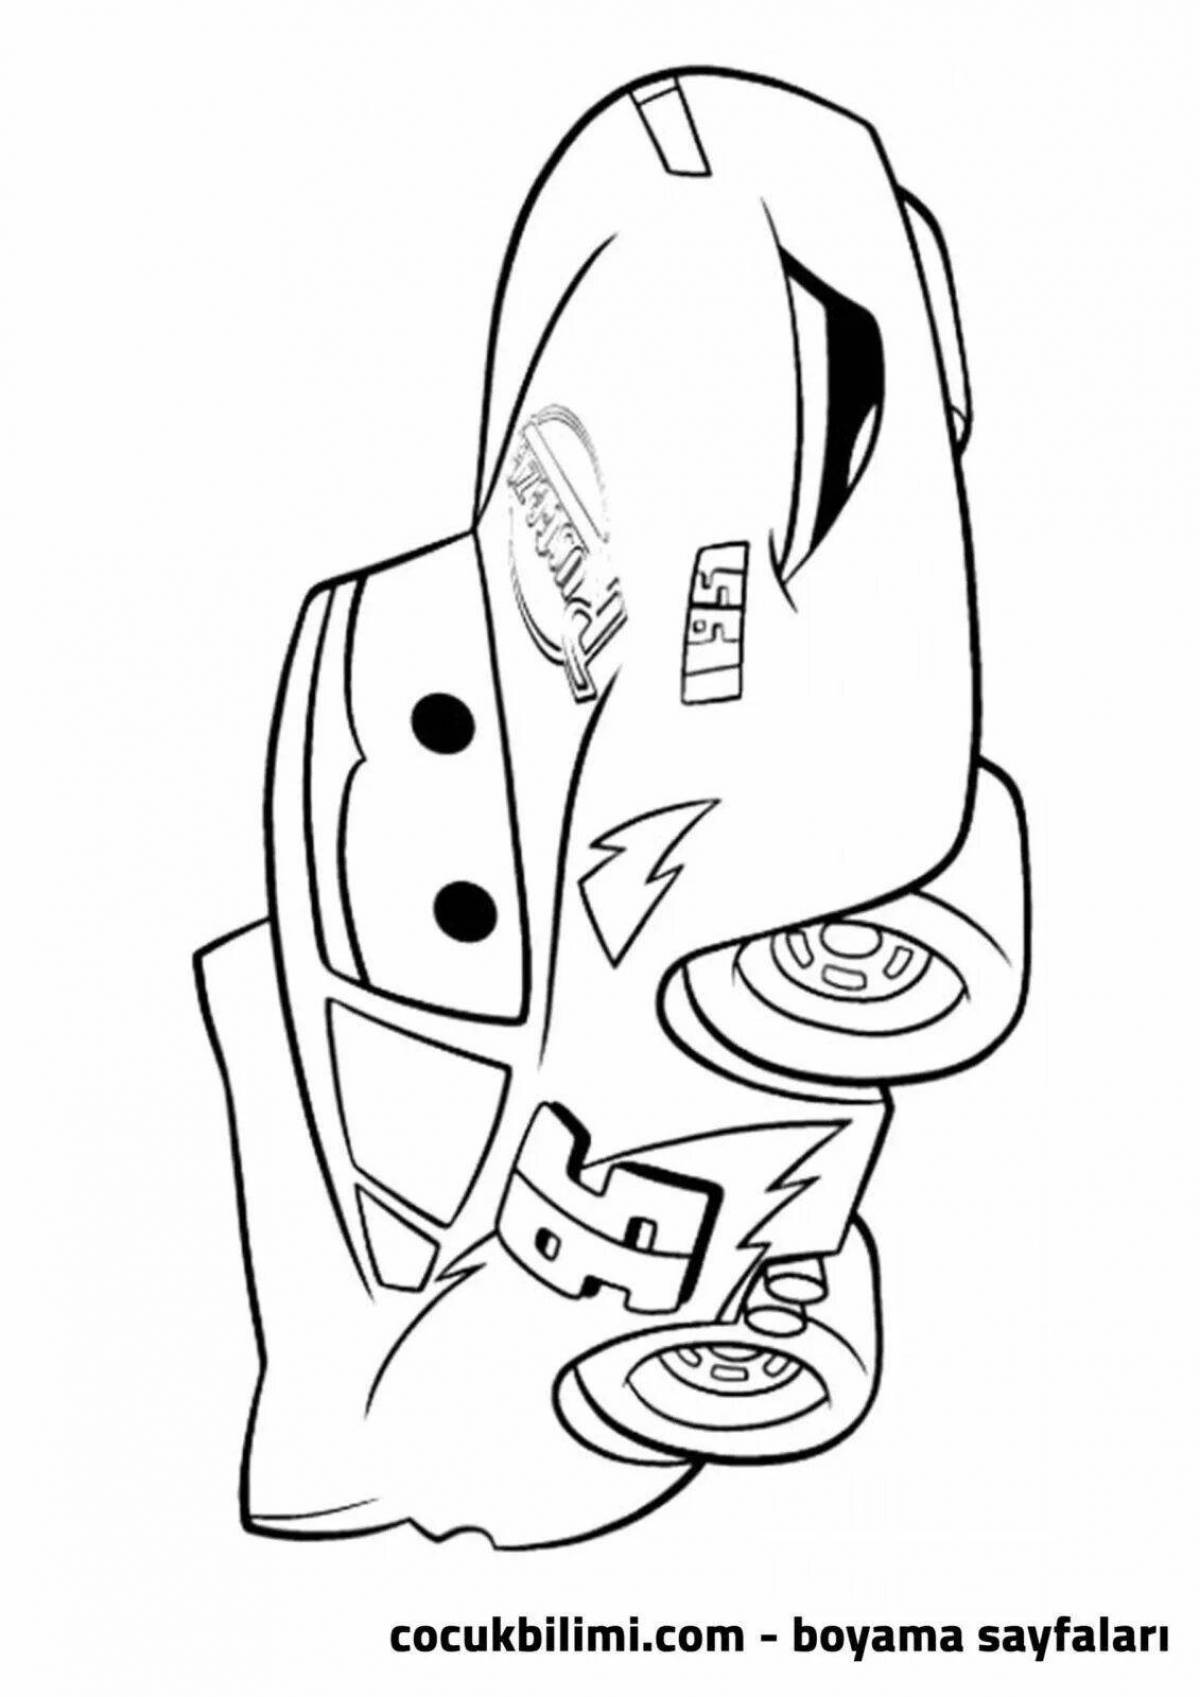 Improved harvester coloring page